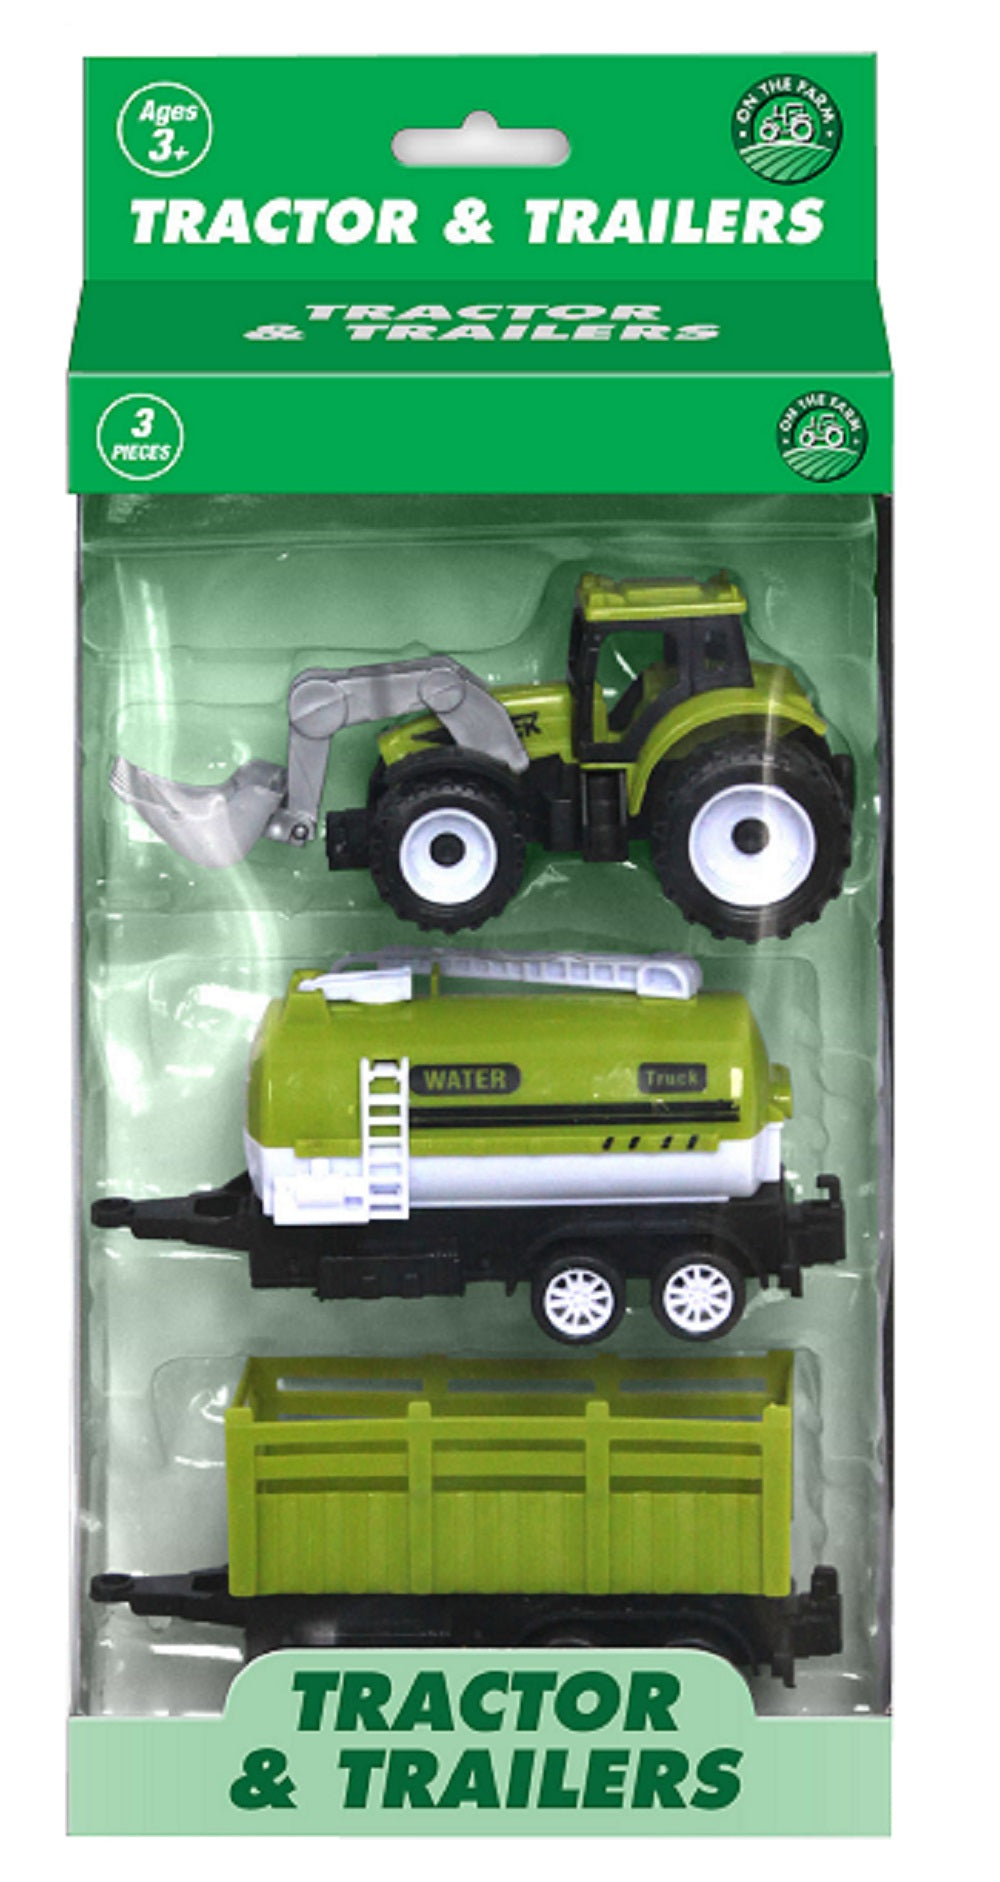 Kandytoys 3pc Tractor And Trailers Set